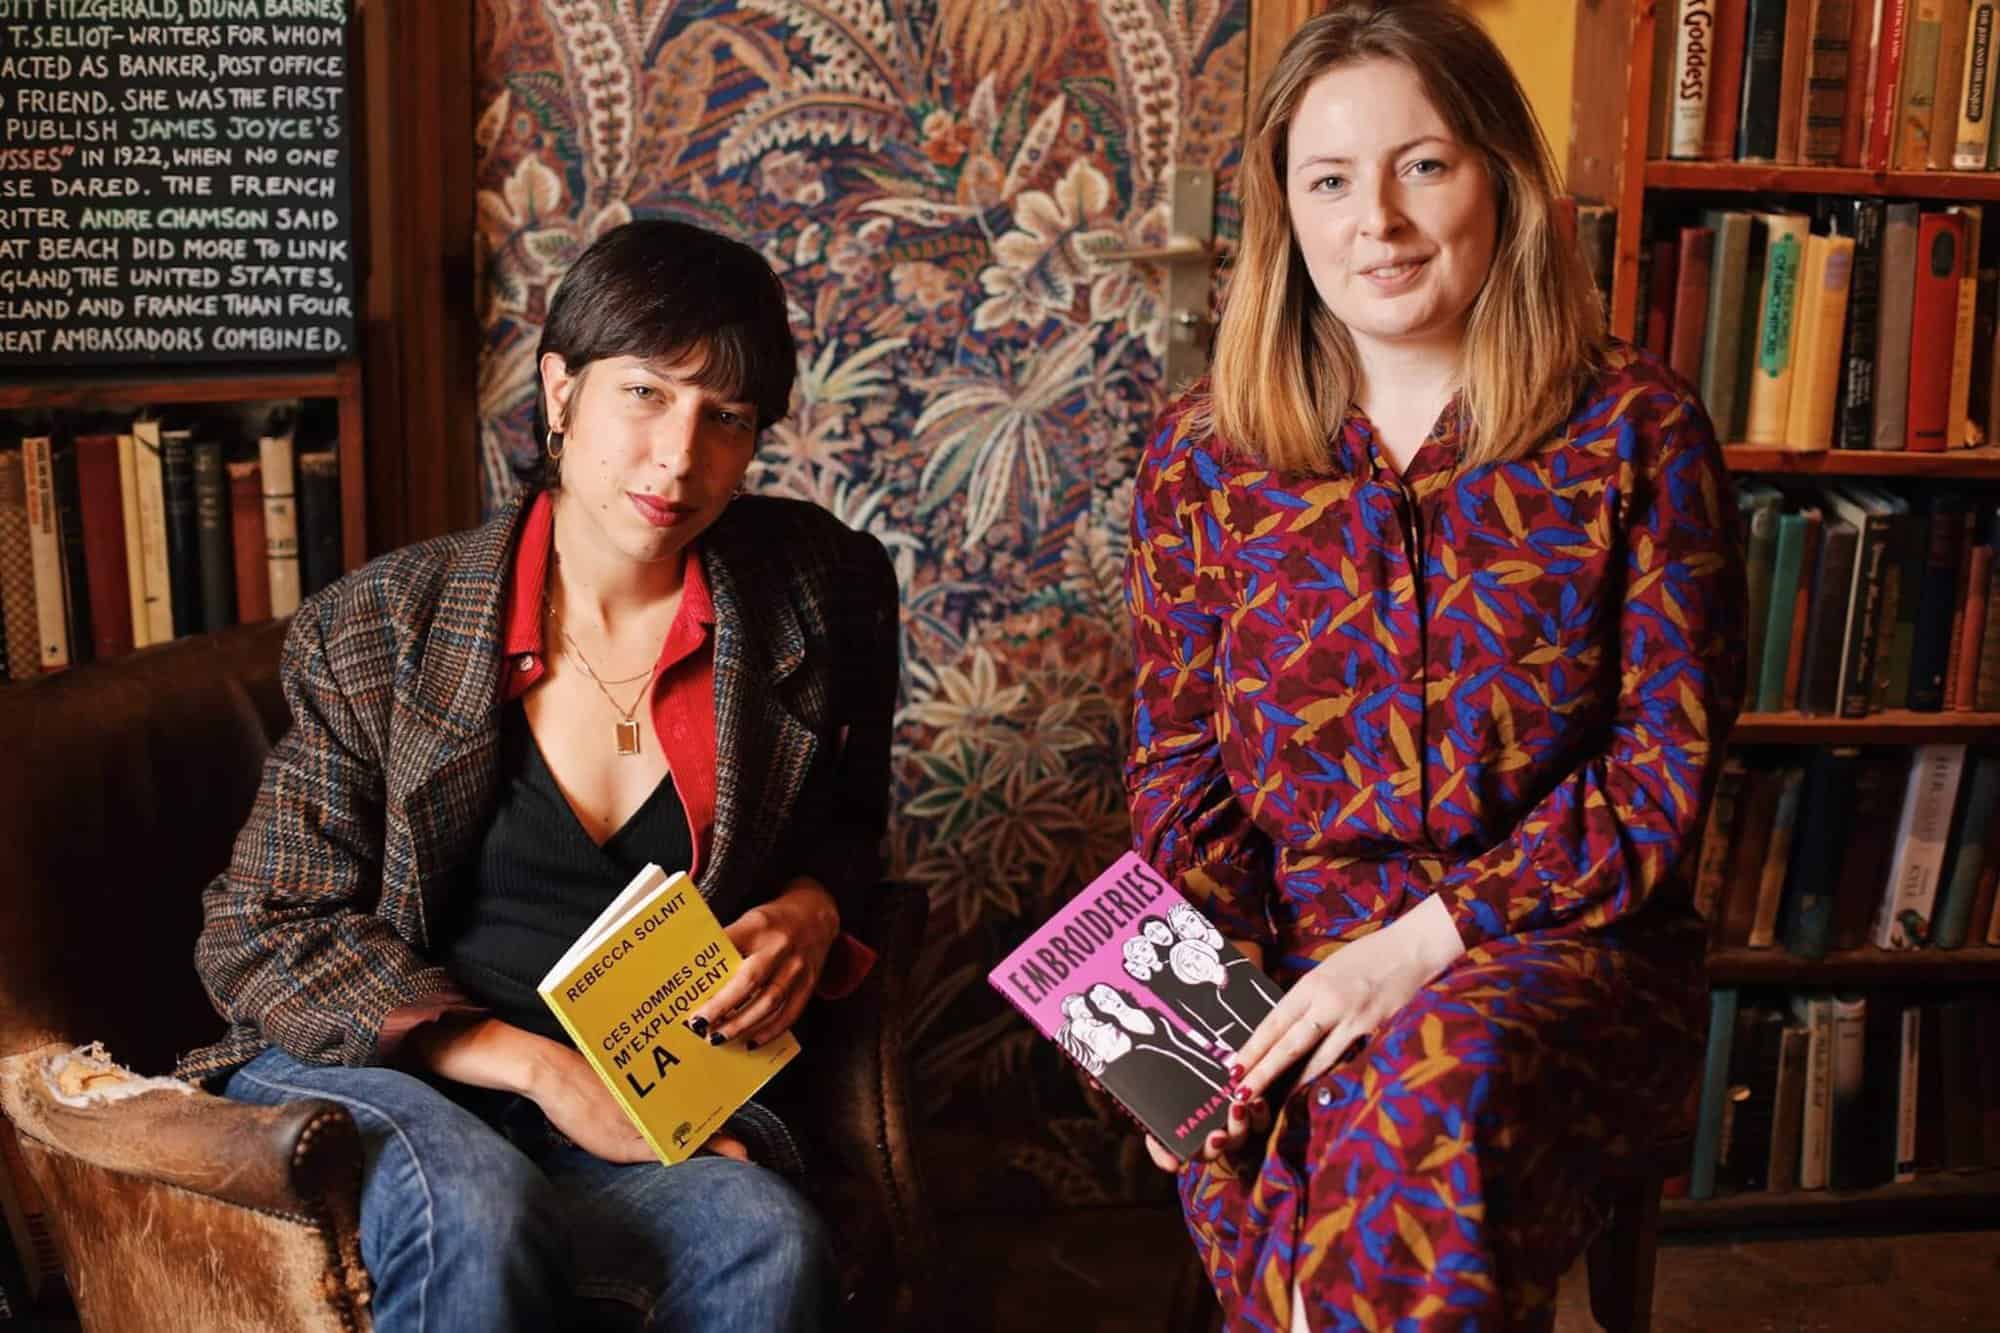 Hosts of the Feminist book club, Camille Lou to the left and Lou Binns to the right, sitting side by side with books in their hands. Camille dressed in a blazer, tshirt and jeans, Lou wearing a long, printed dress, and the two smile at the camera.